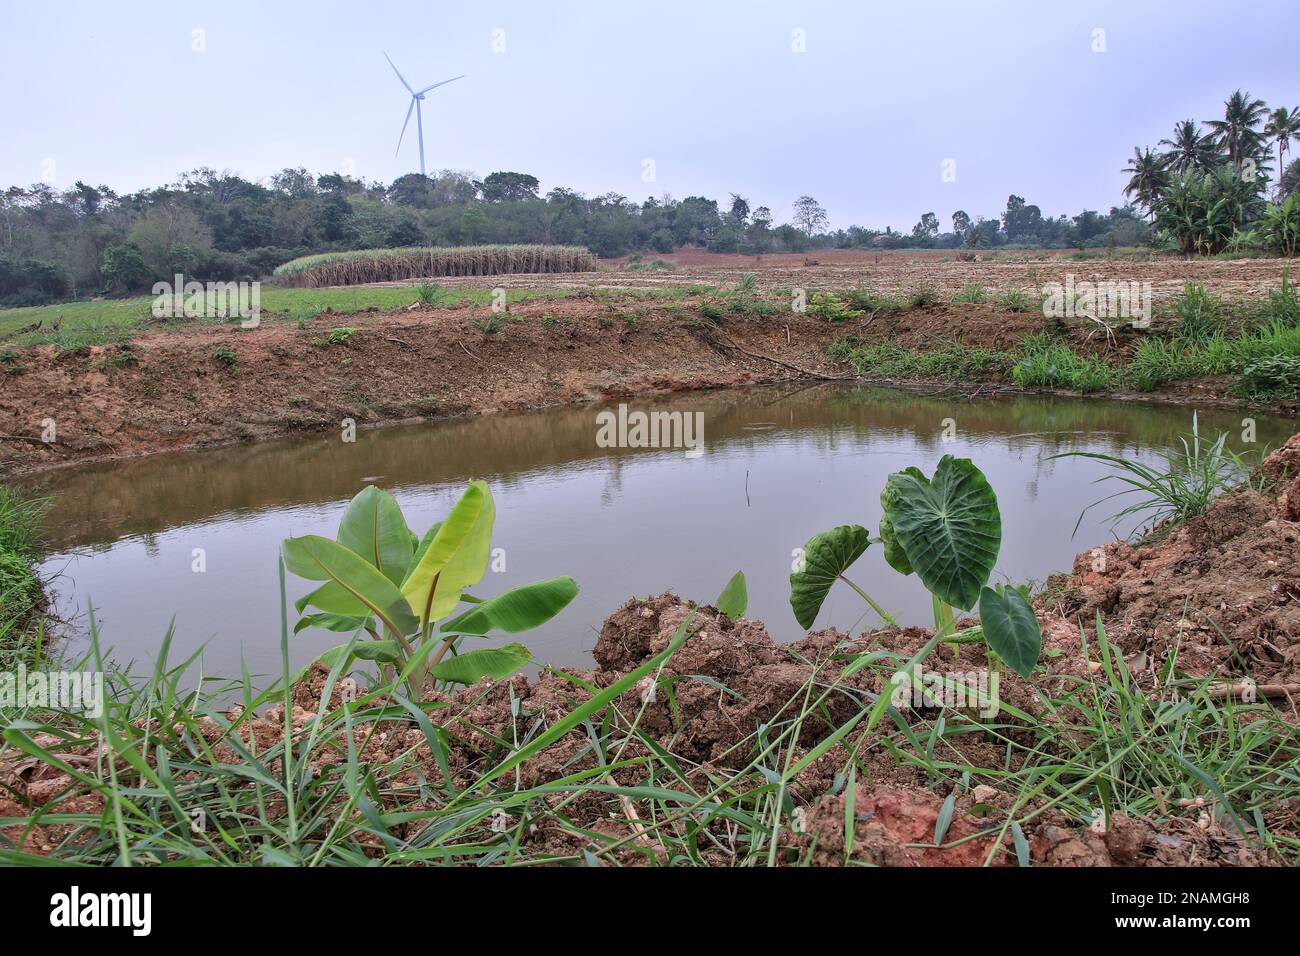 Farmers will dig wells to store water for use during the dry season. And popularly planted various perennials by the pond to prevent soil erosion. Stock Photo